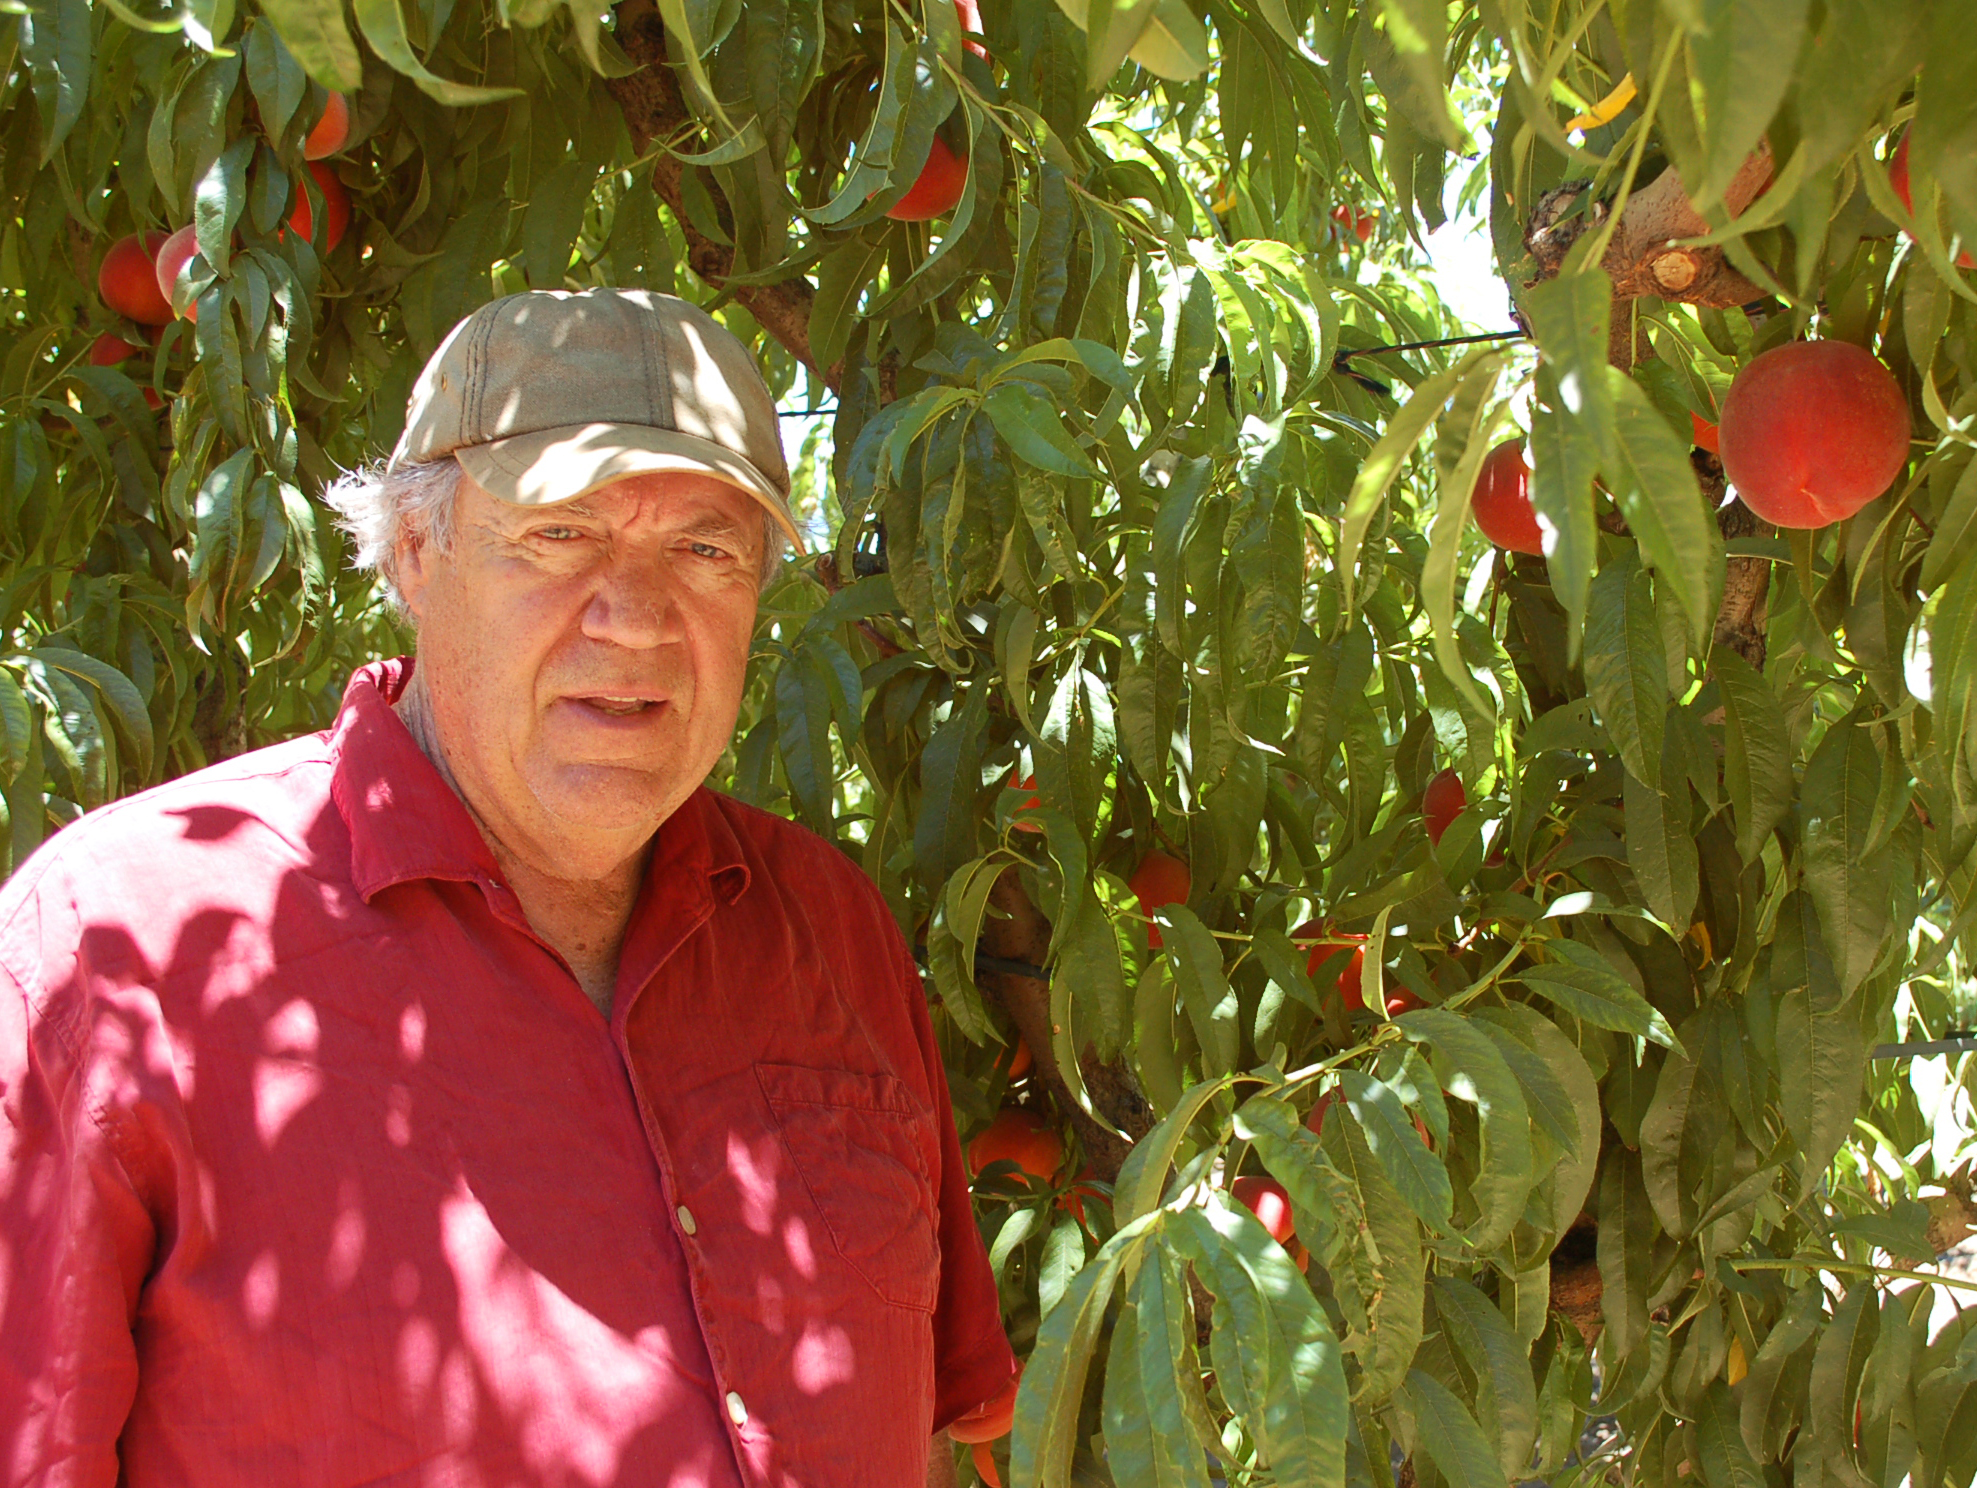 Andy Mariani has the largest collection of heirloom stone fruit on the West Coast. Photo: Susan Hathaway